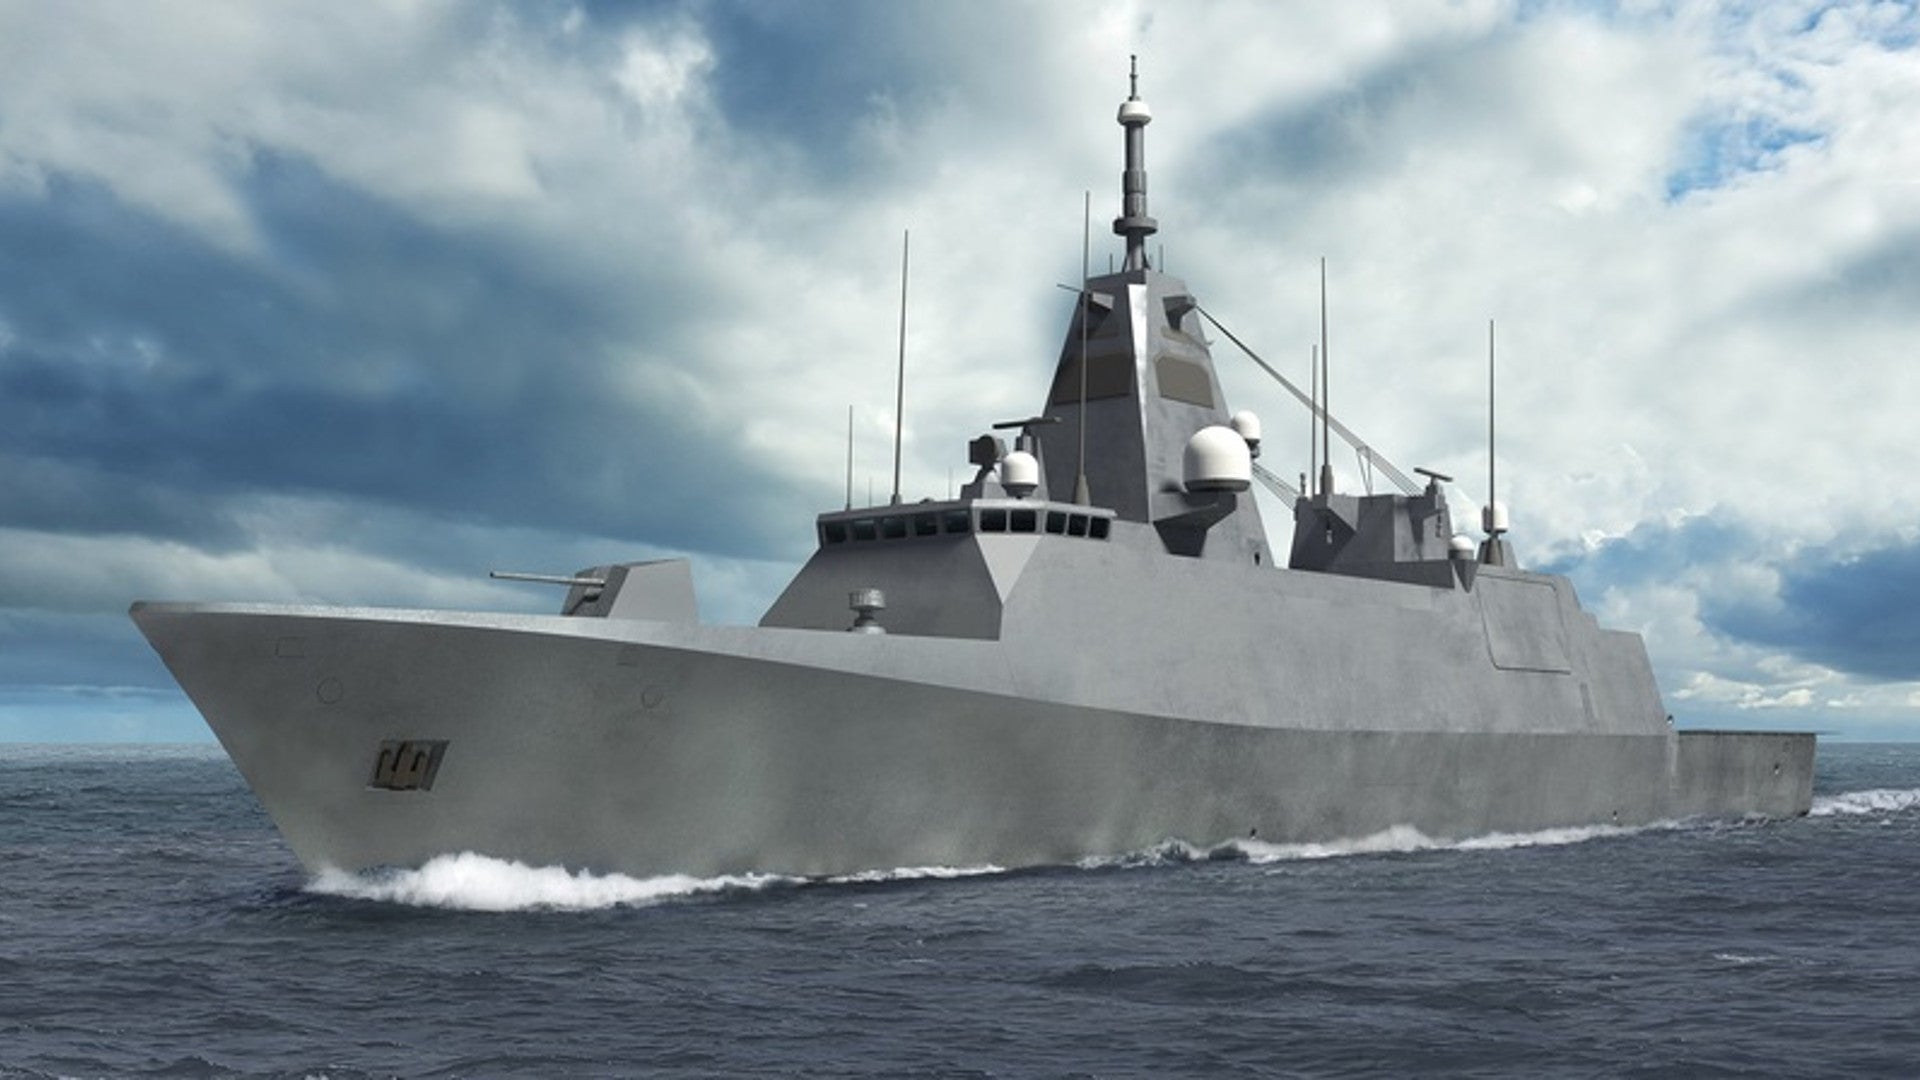 Finland’s Getting Ice-Breaking Missile Corvettes With Serious Air Defense Abilities